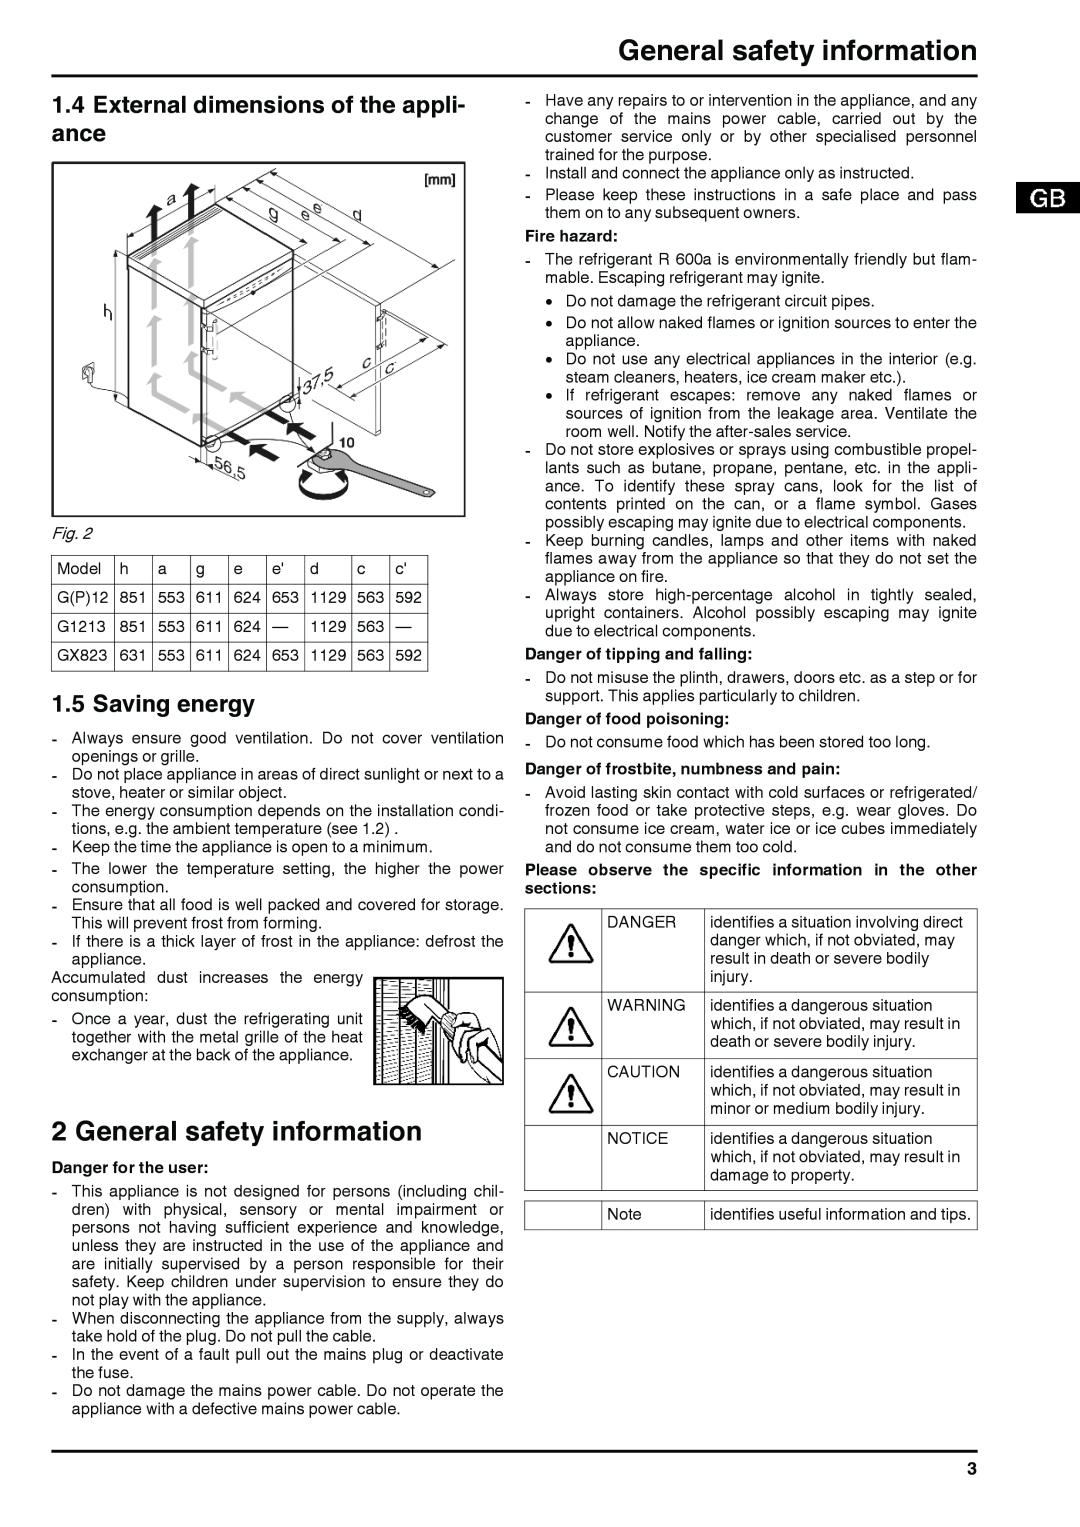 Liebherr 7081998-0 General safety information, 1.4External dimensions of the appli- ance, Saving energy 